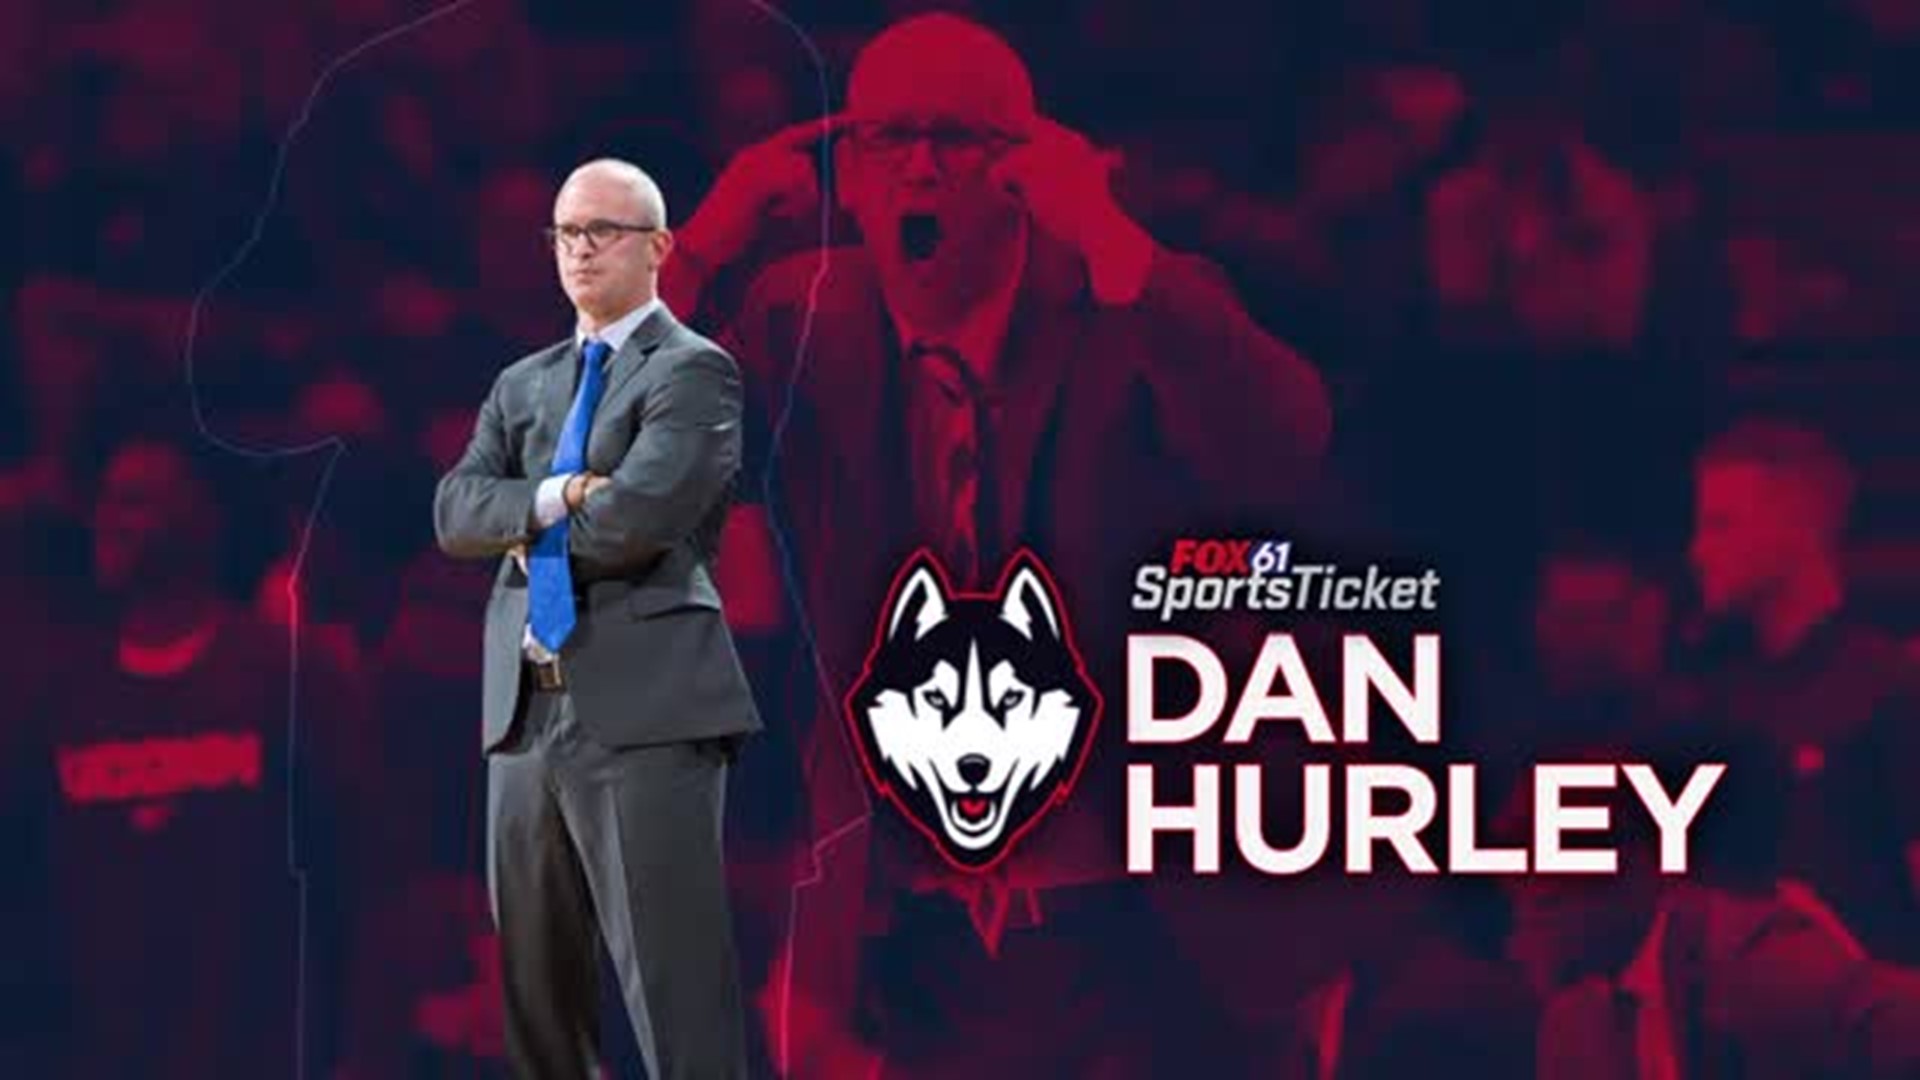 FOX61 Sports Ticket Exclusive: One on One with Dan Hurley Part 3 ii